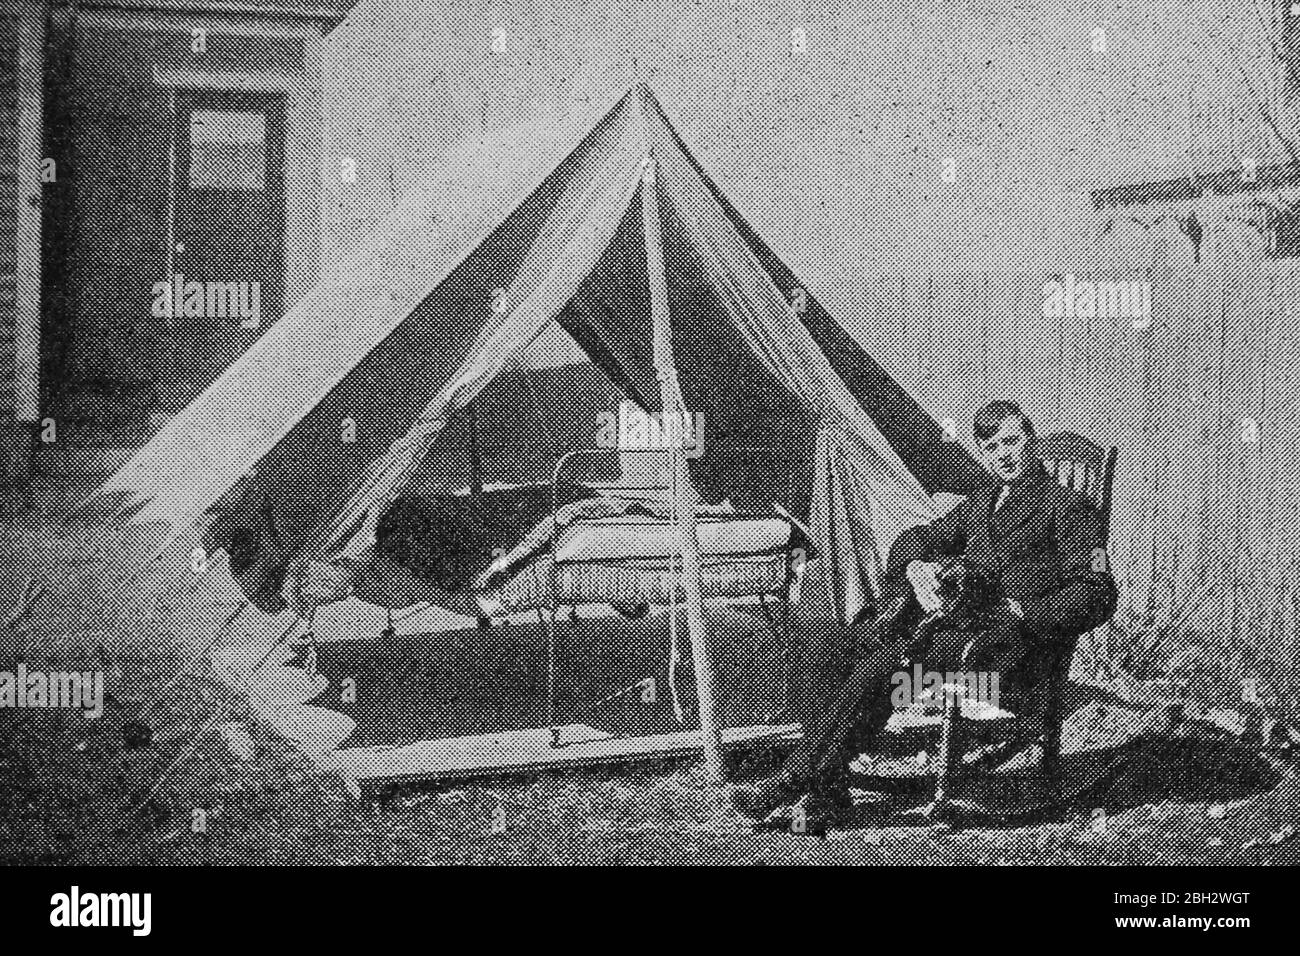 Image from the book 'Epidemics, How to Meet Them' by Louis A. Hansen, featuring a man sitting in front of a tent with a hospital bed in it, likely a quarantine or isolation tent, published by Review and Herald Publishing Association, 1919. Courtesy Internet Archive. () Stock Photo